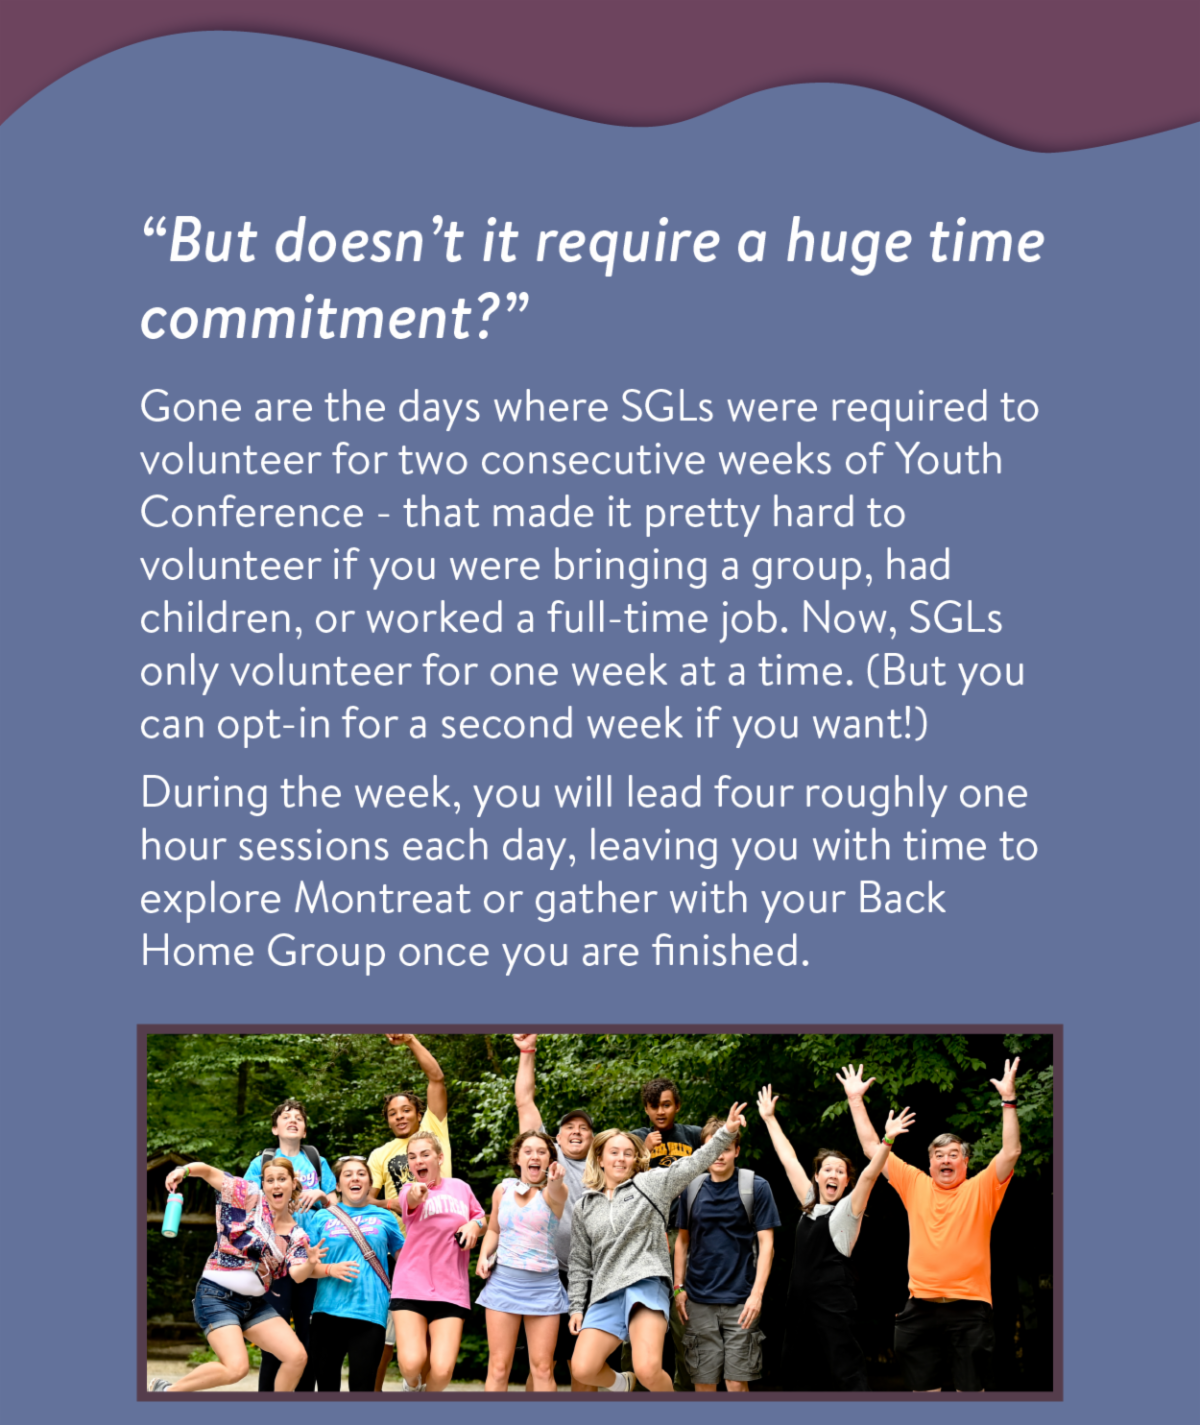 "But doesn't it require a huge time commitment?" - Gone are the days where SGLs were required to volunteer for two consecutive weeks of Youth Conference - that made it pretty hard to volunteer if you were bringing a group, had children, or worked a full-time job. Now, SGLs only volunteer for one week at a time. (But you can opt-in for a second week if you want!) During the week, you will lead four roughly one hour sessions each day, leaving you with time to explore Montreat or gather with your Back Home Group once you are finished.